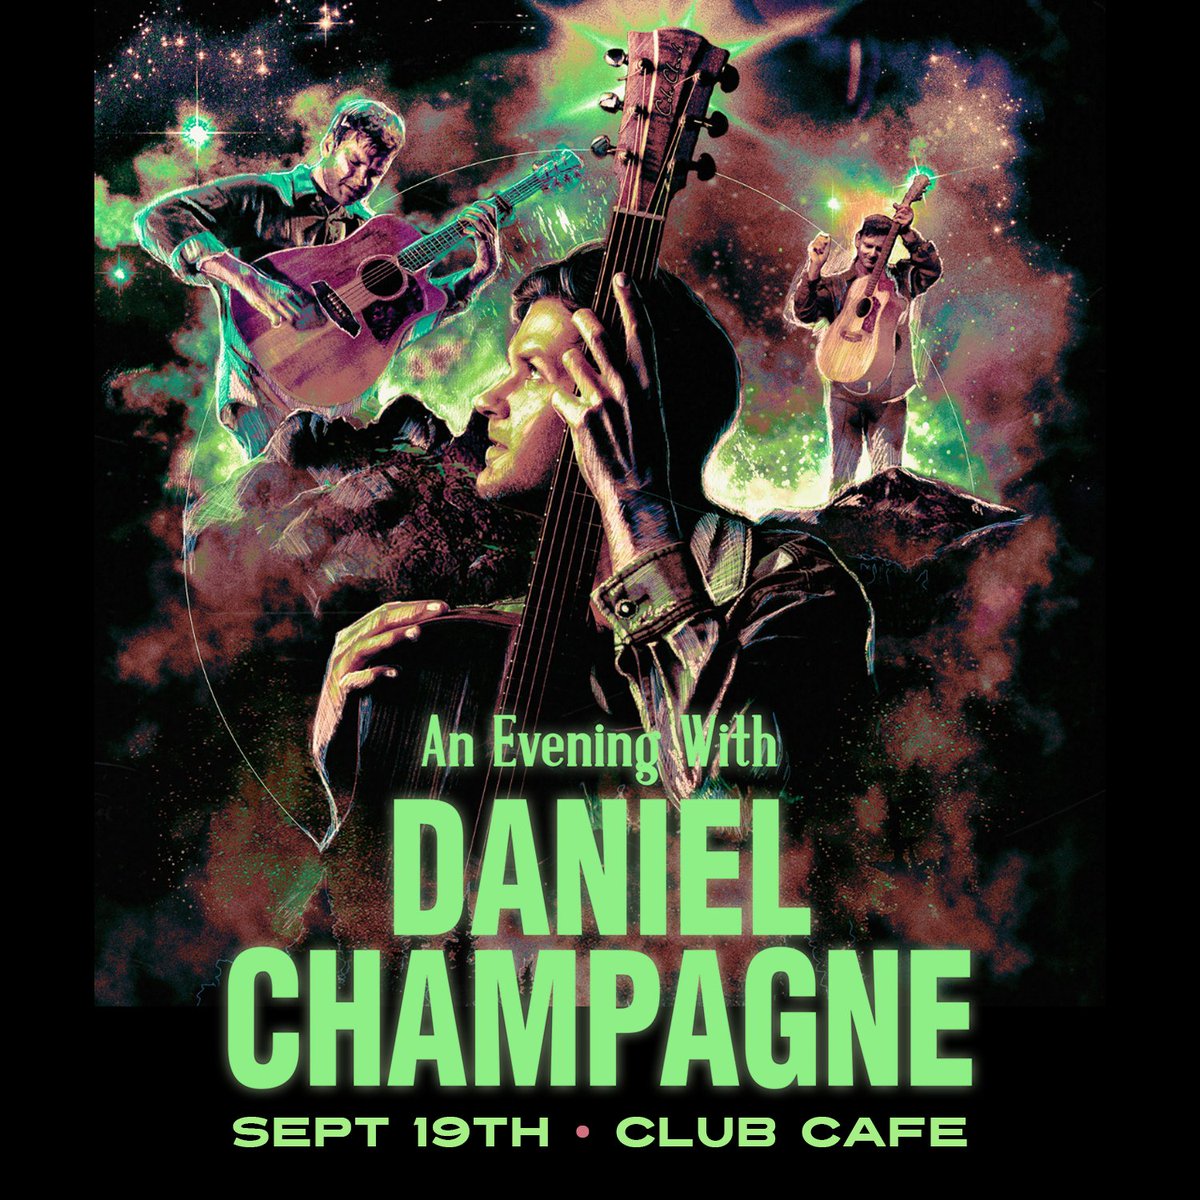 📣🗓 NEW SHOW 🗓📣

@ClubCafeLive | 09/19 | An Evening With #DanielChampagne! 

🎟 On Sale 05/06 at 10AM via: hive.co/l/0919danielch… 

#opusonepgh #pittsburgh #danielchampagne #clubcafe #clubcafelive #national #songwriter